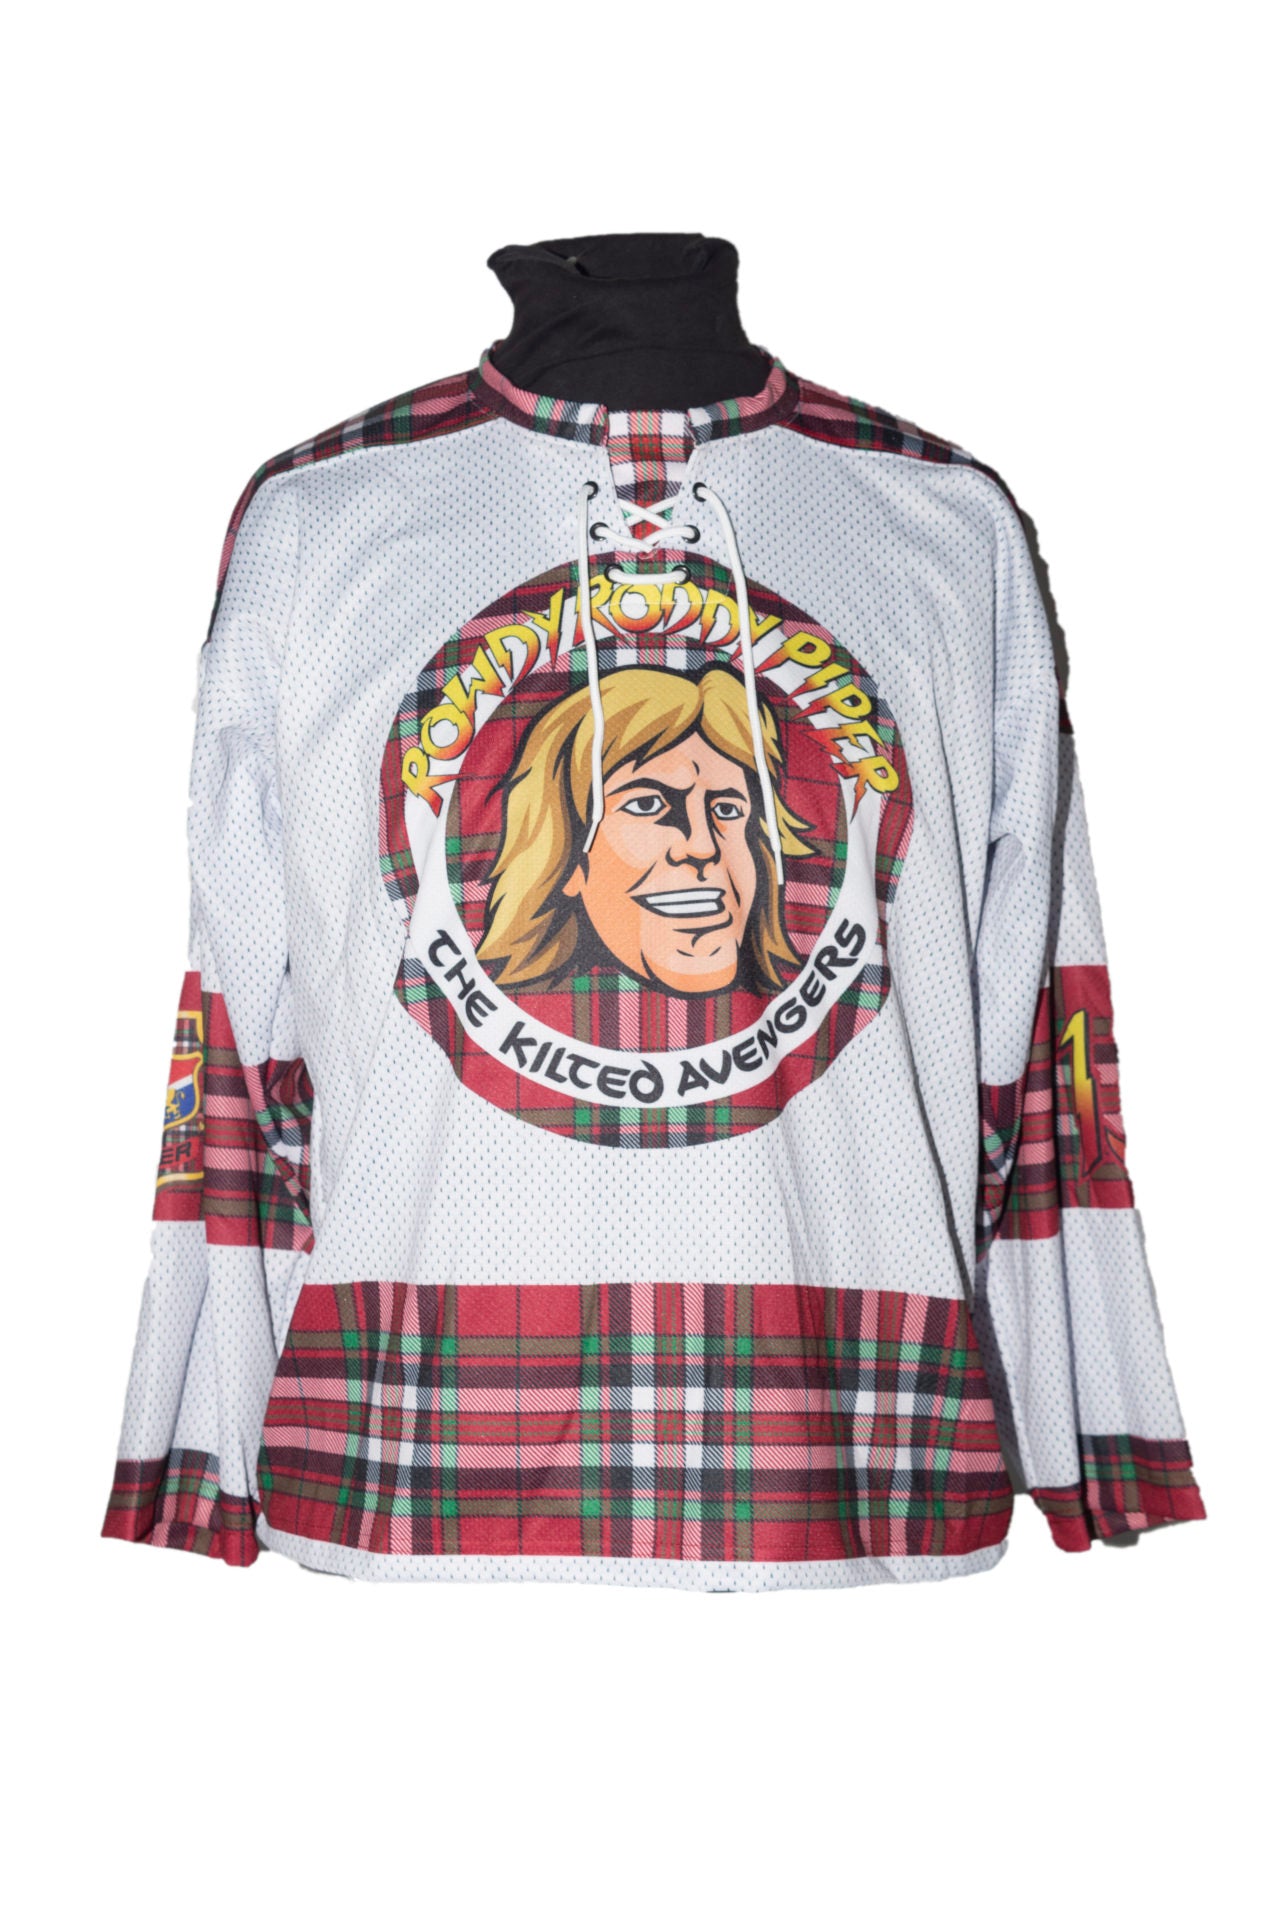 Rowdy Roddy Piper The Kilted Avengers Away Jersey - White